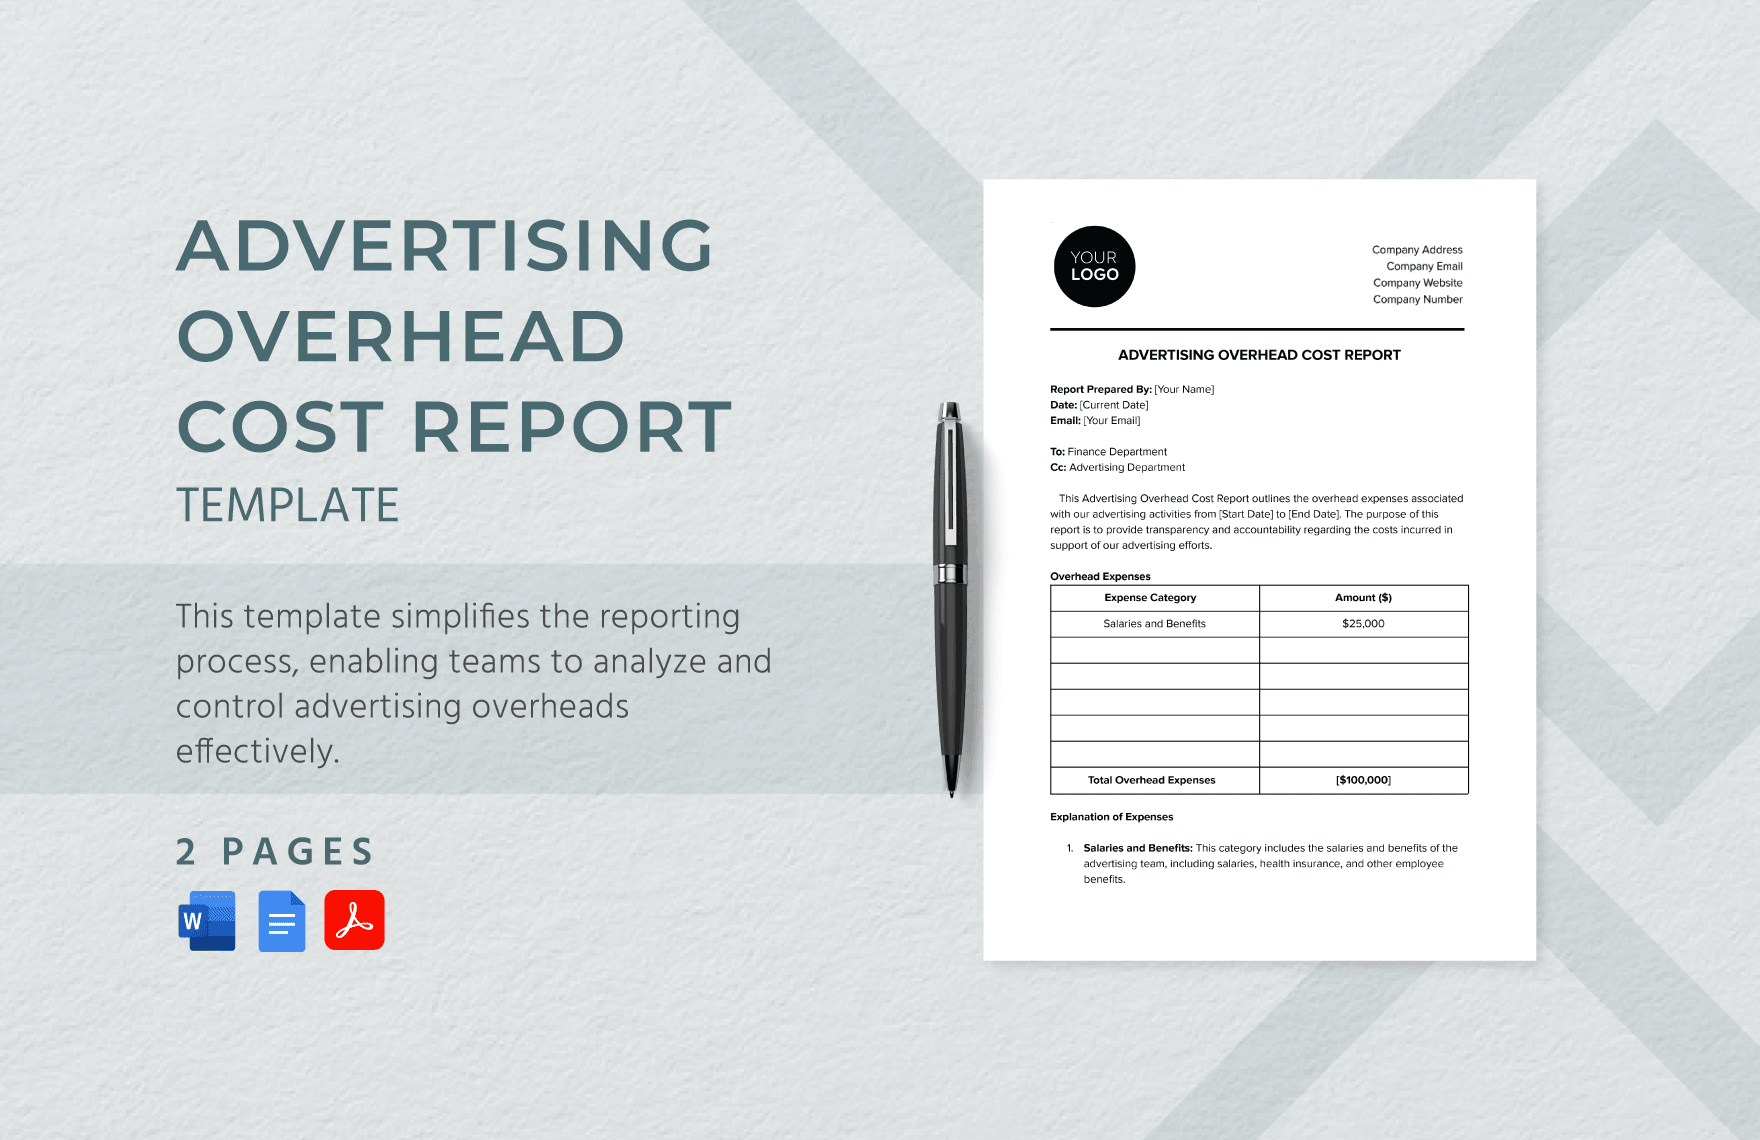 Advertising Overhead Cost Report Template in Word, Google Docs, PDF